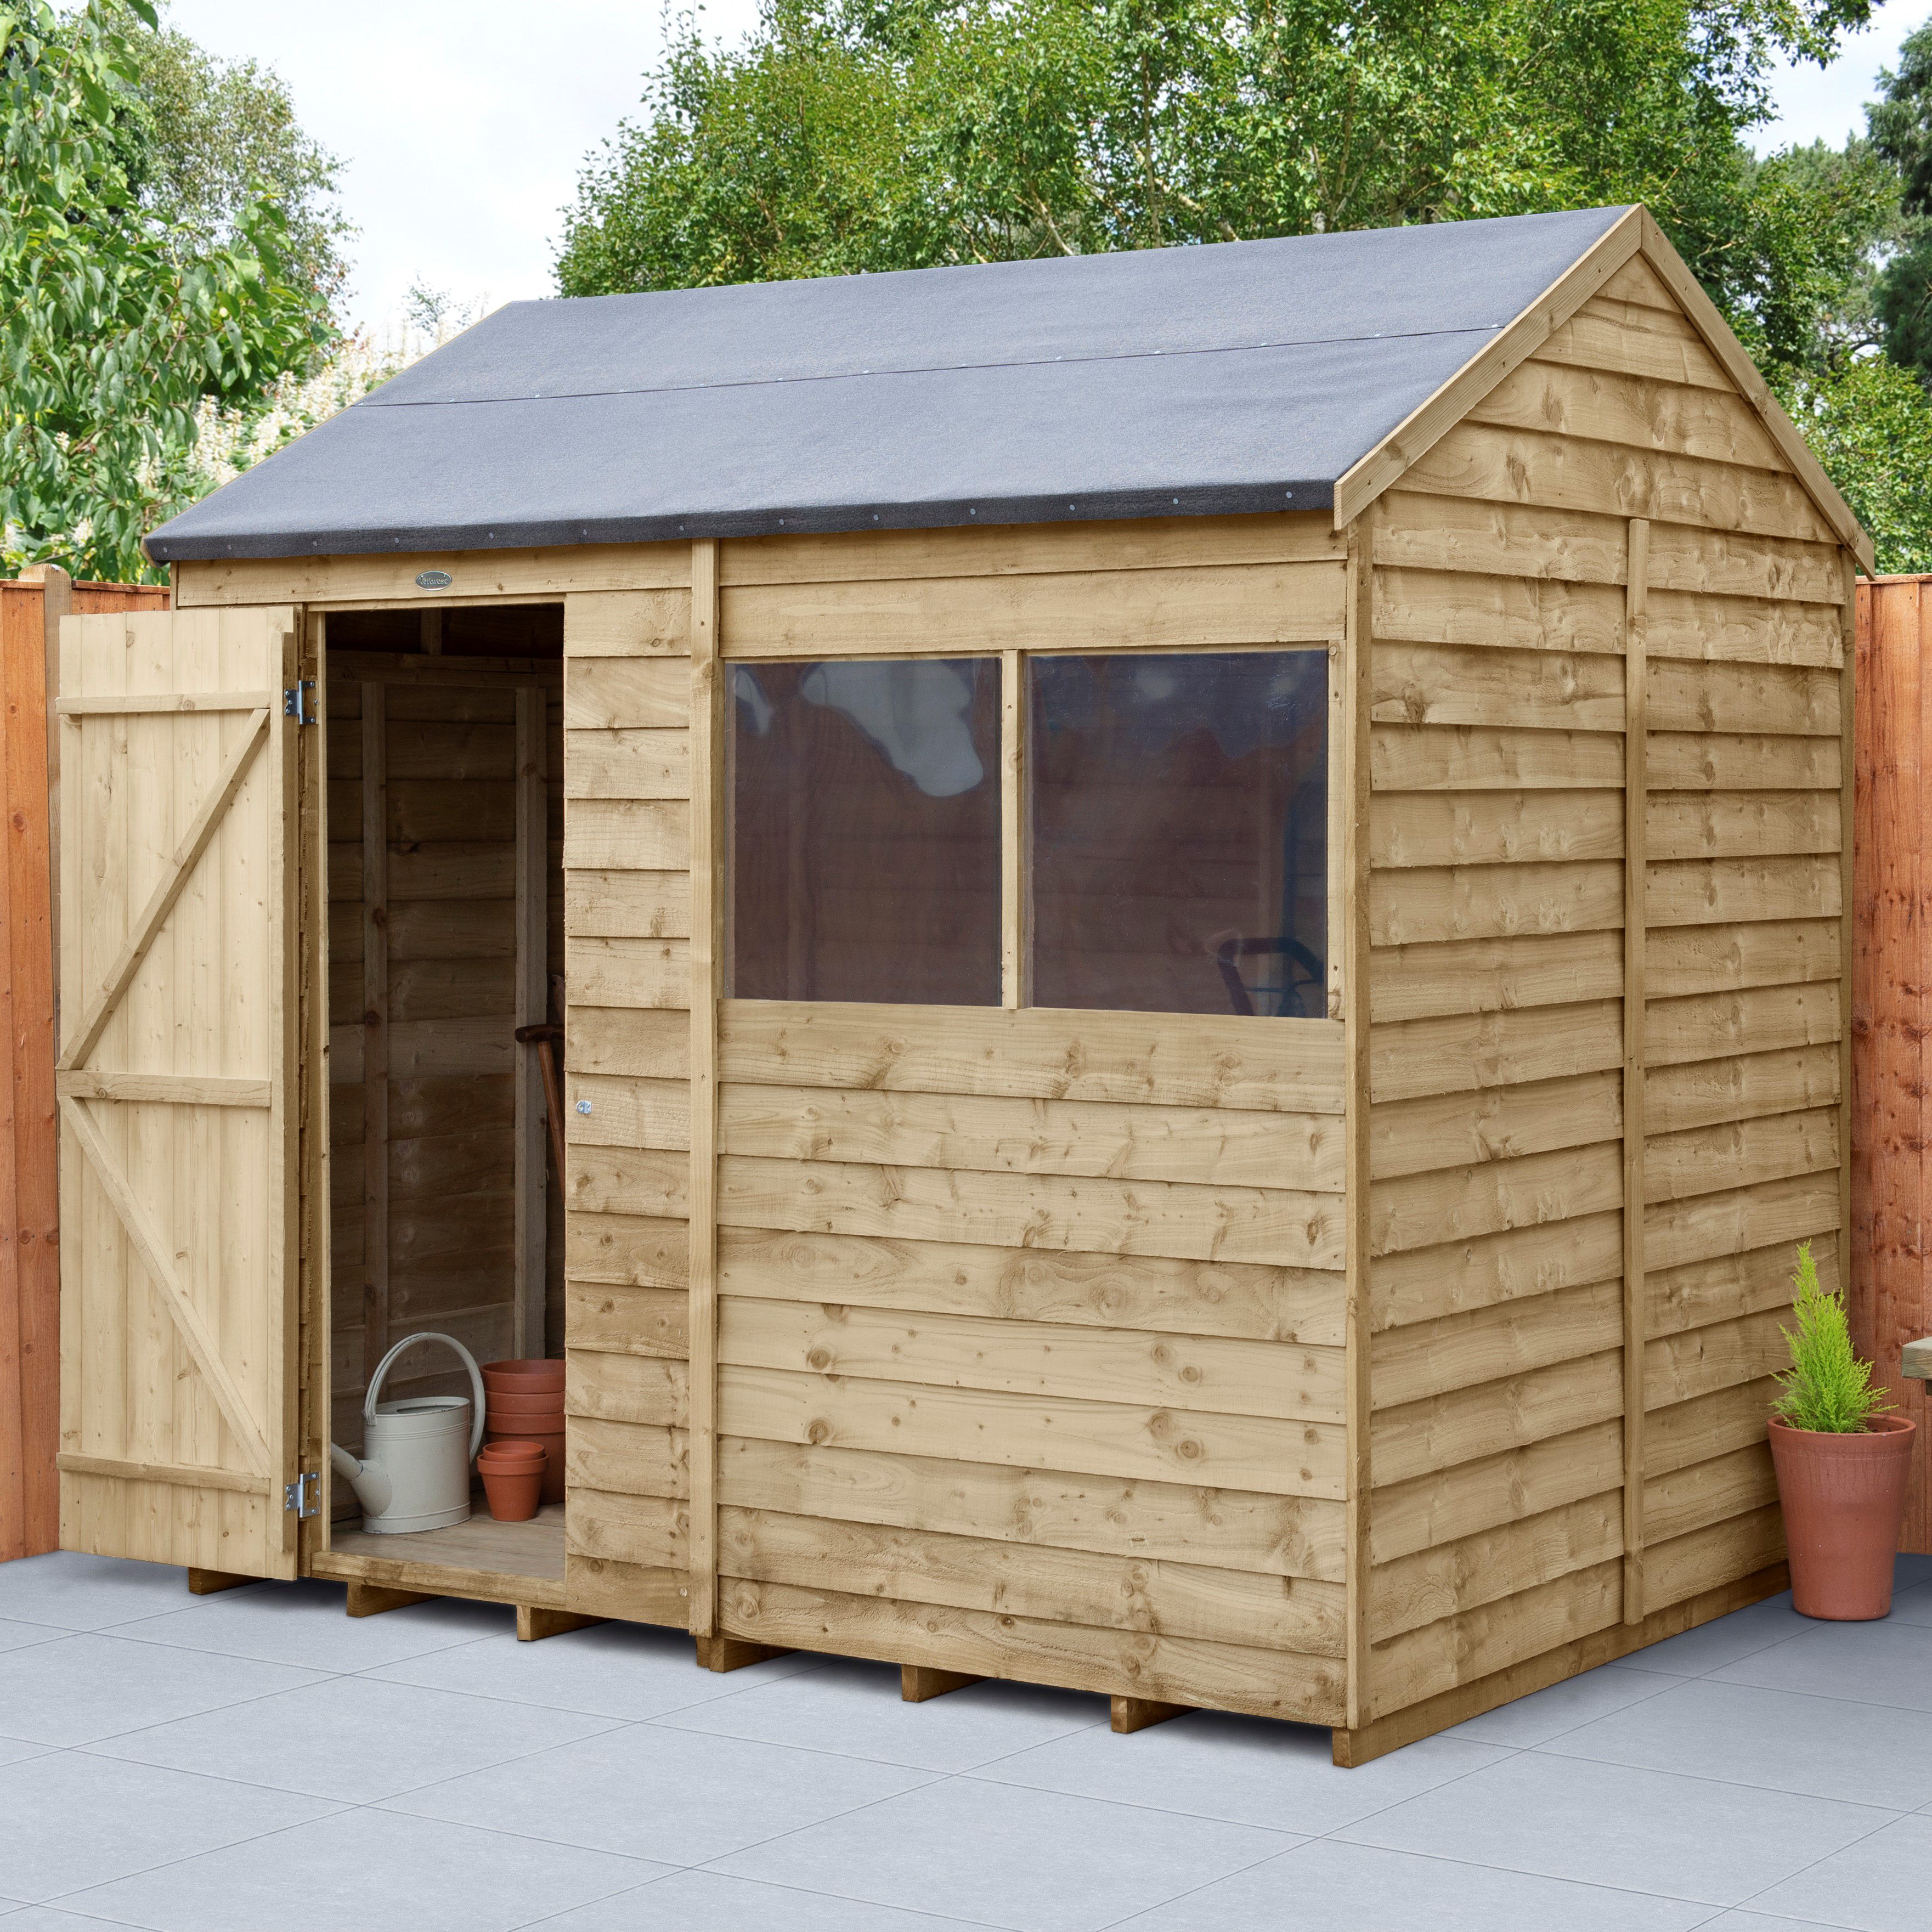 Forest Garden Overlap 8x6 ft Reverse apex Wooden Shed with floor & 2 windows